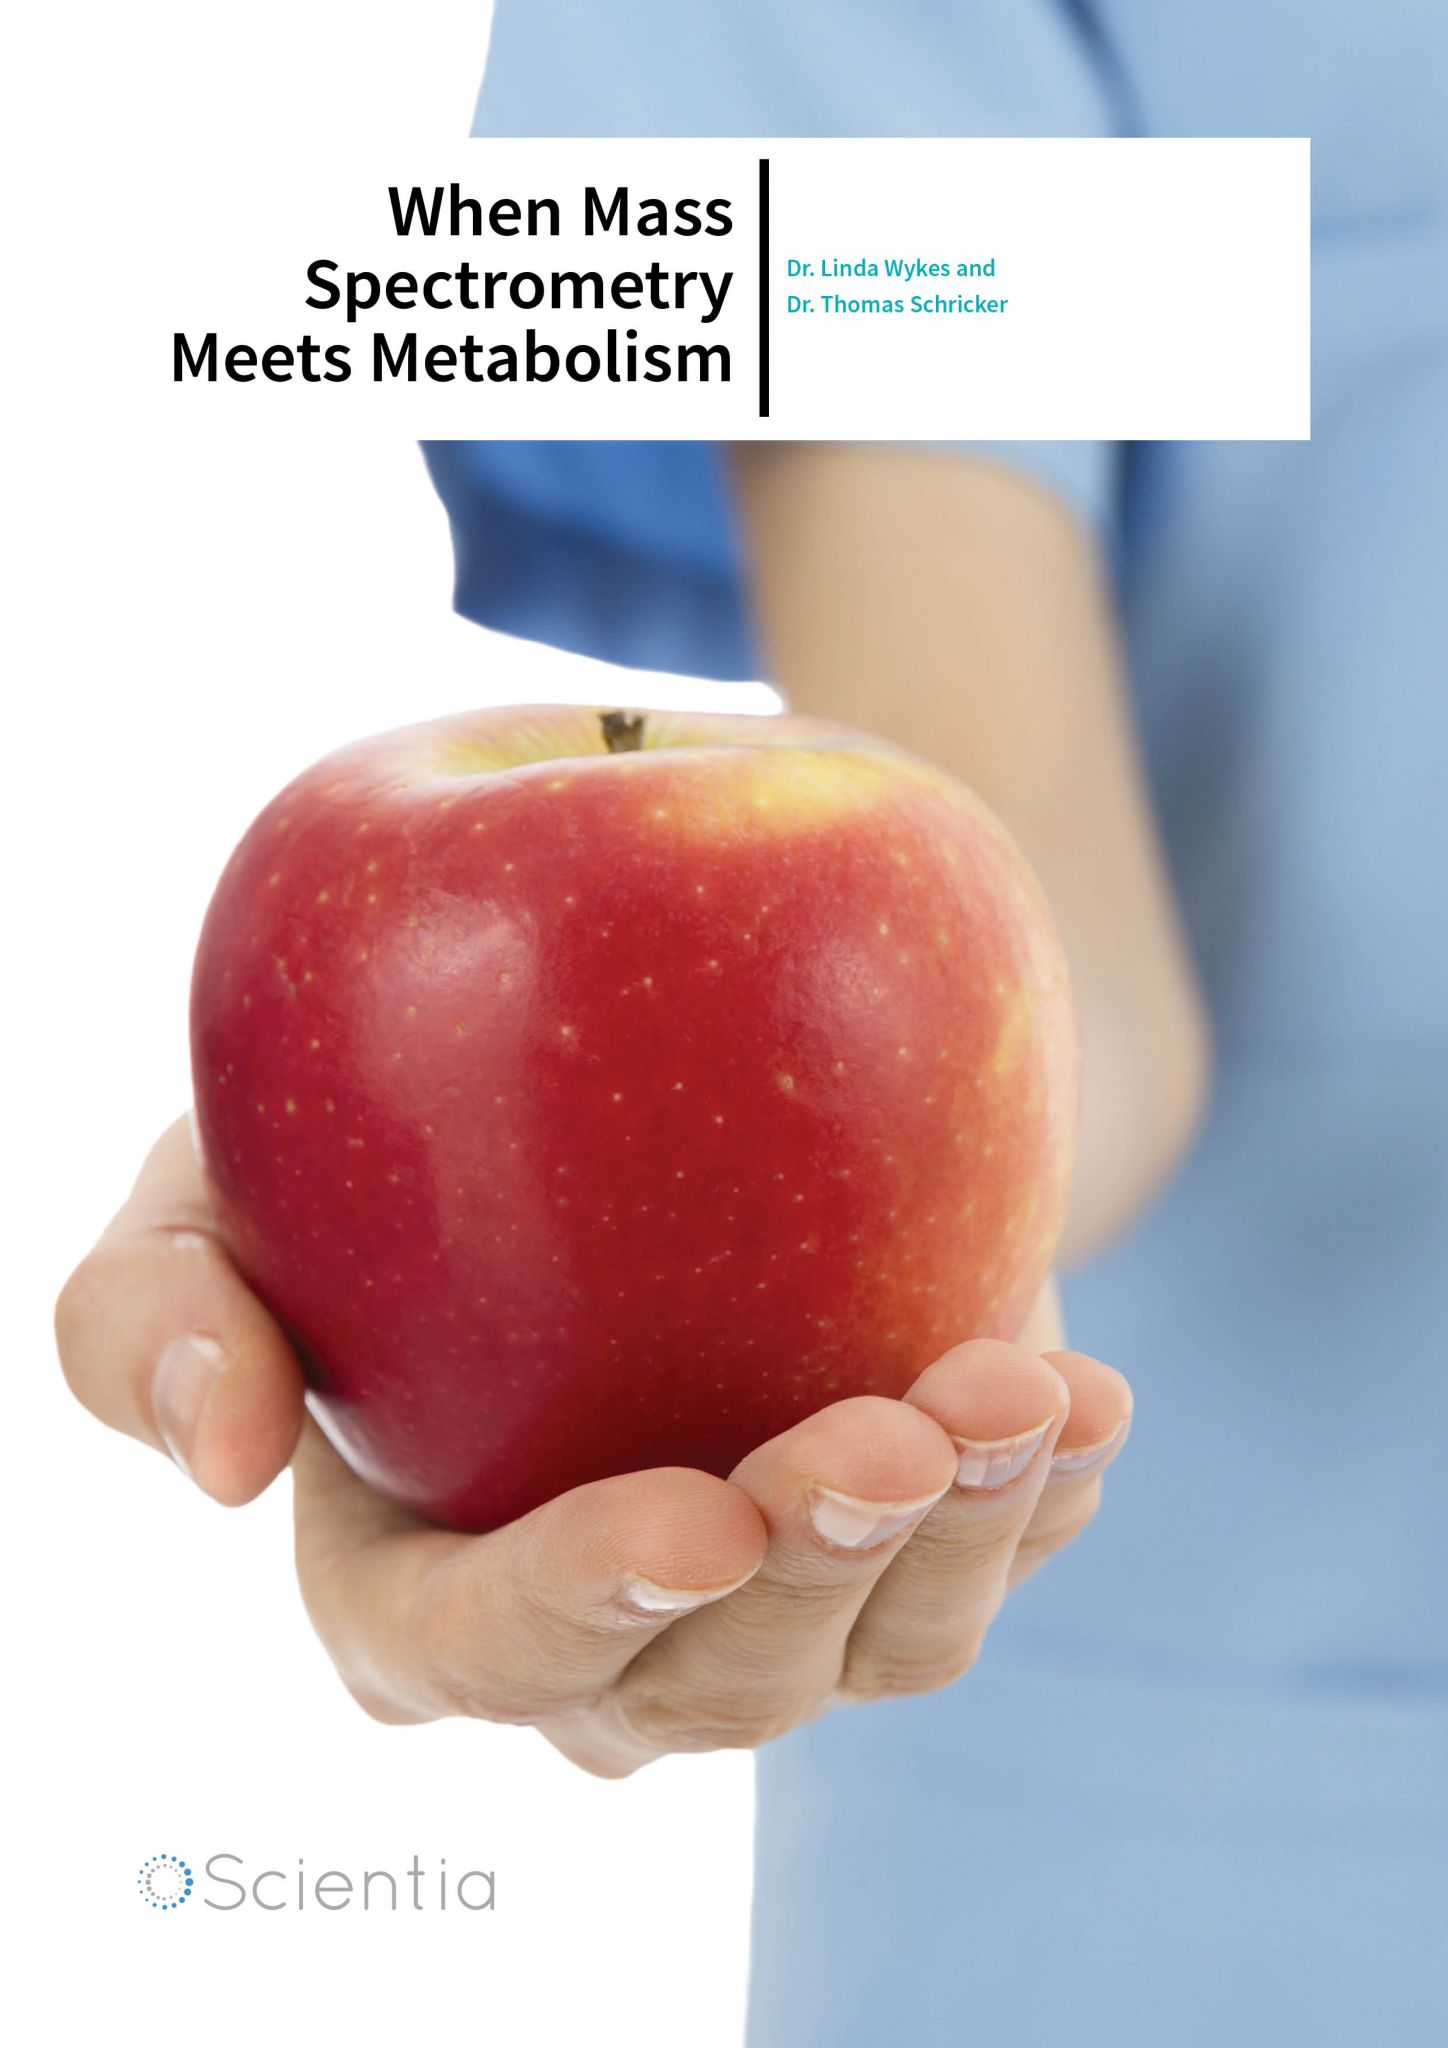 Dr. Linda Wykes And Dr. Thomas Schricker – When Mass Spectrometry Meets Metabolism